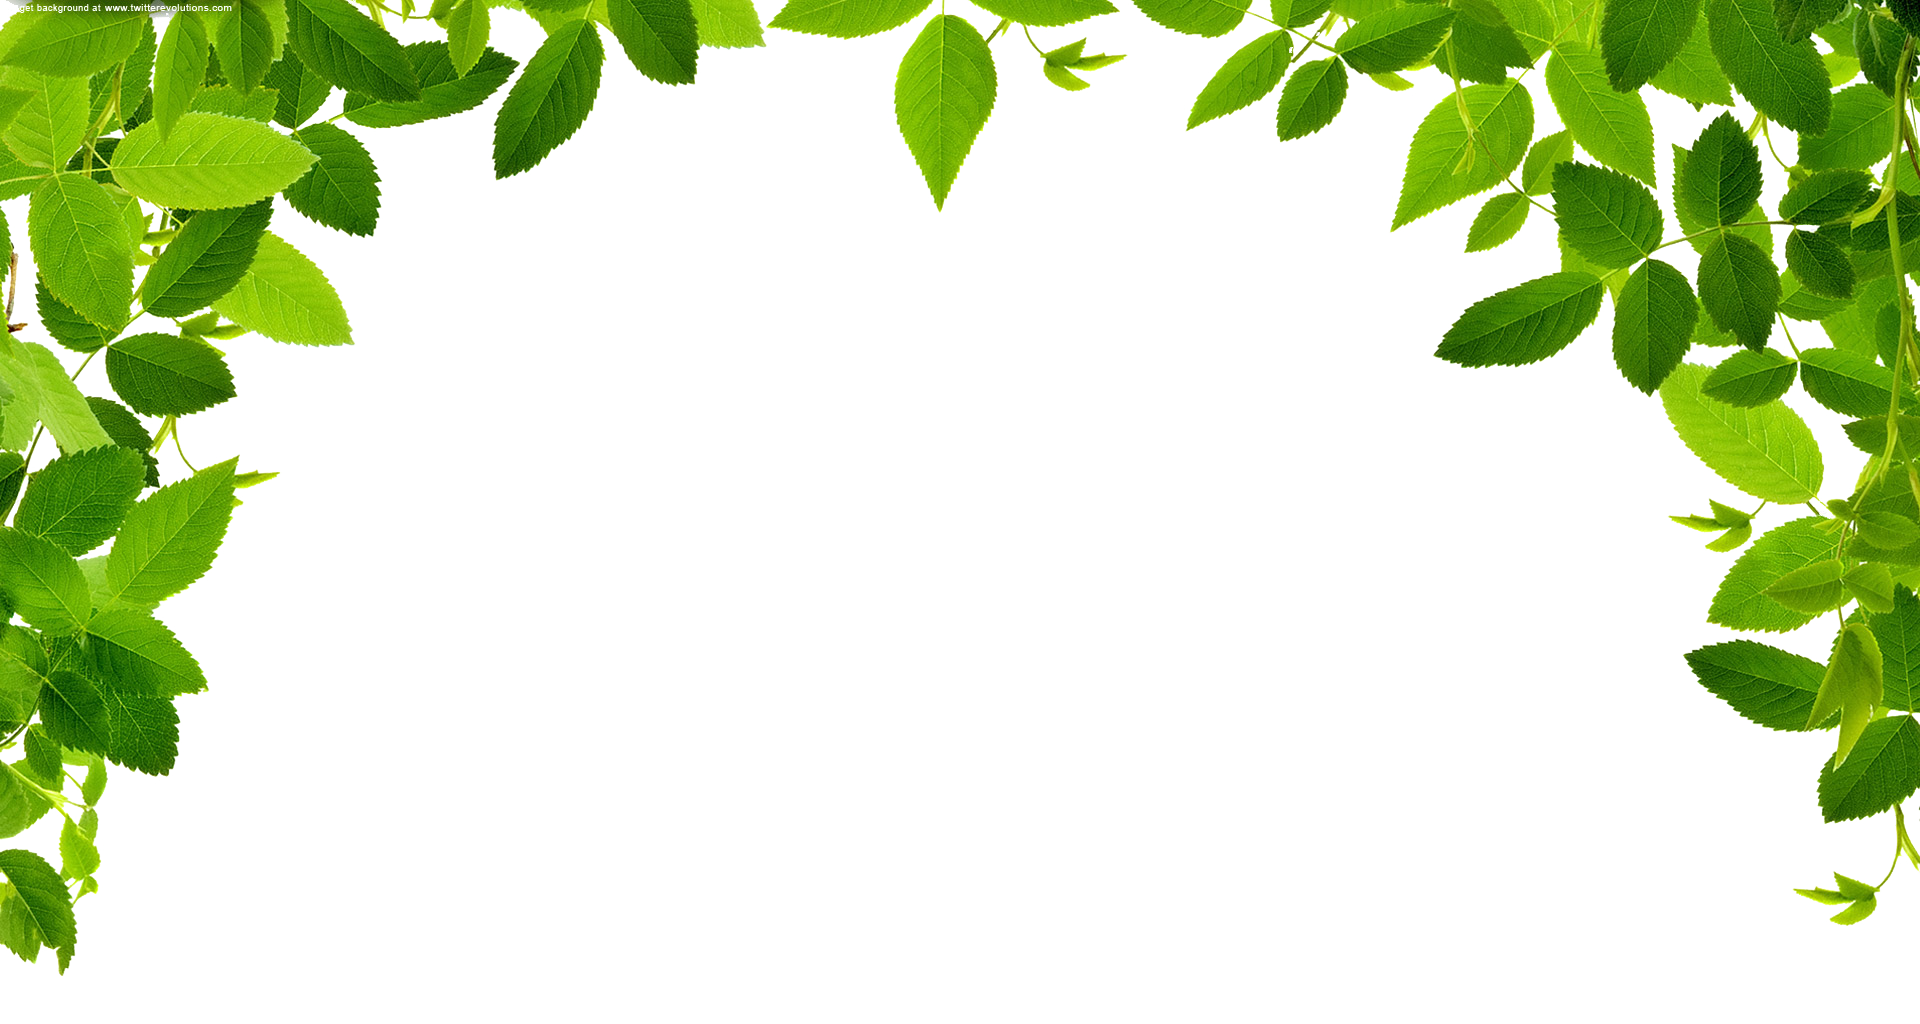 clipart forest background image